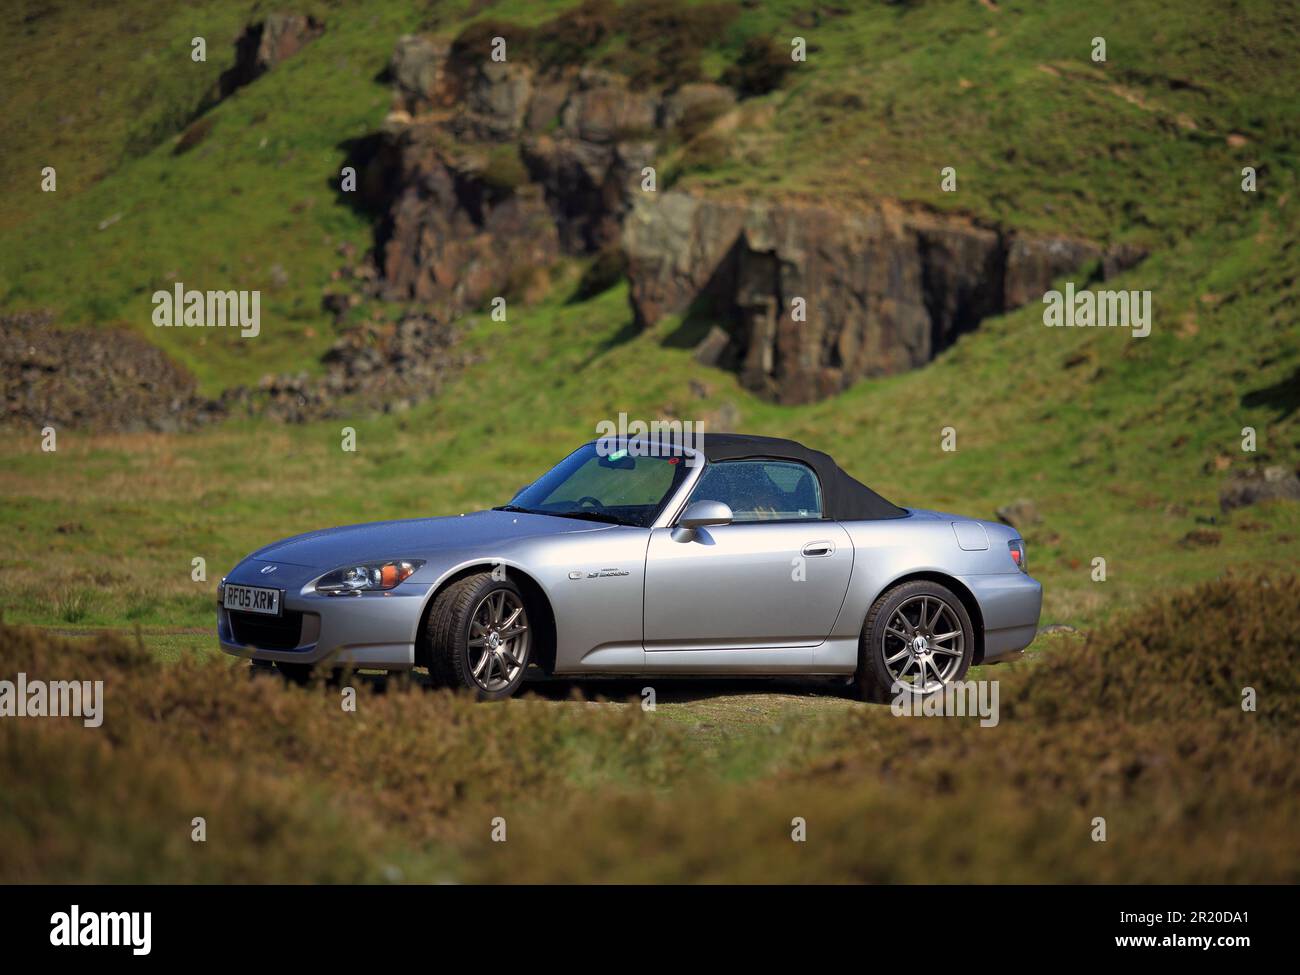 A silver 2005 Honda S2000 parked in the uk countryside. Stock Photo